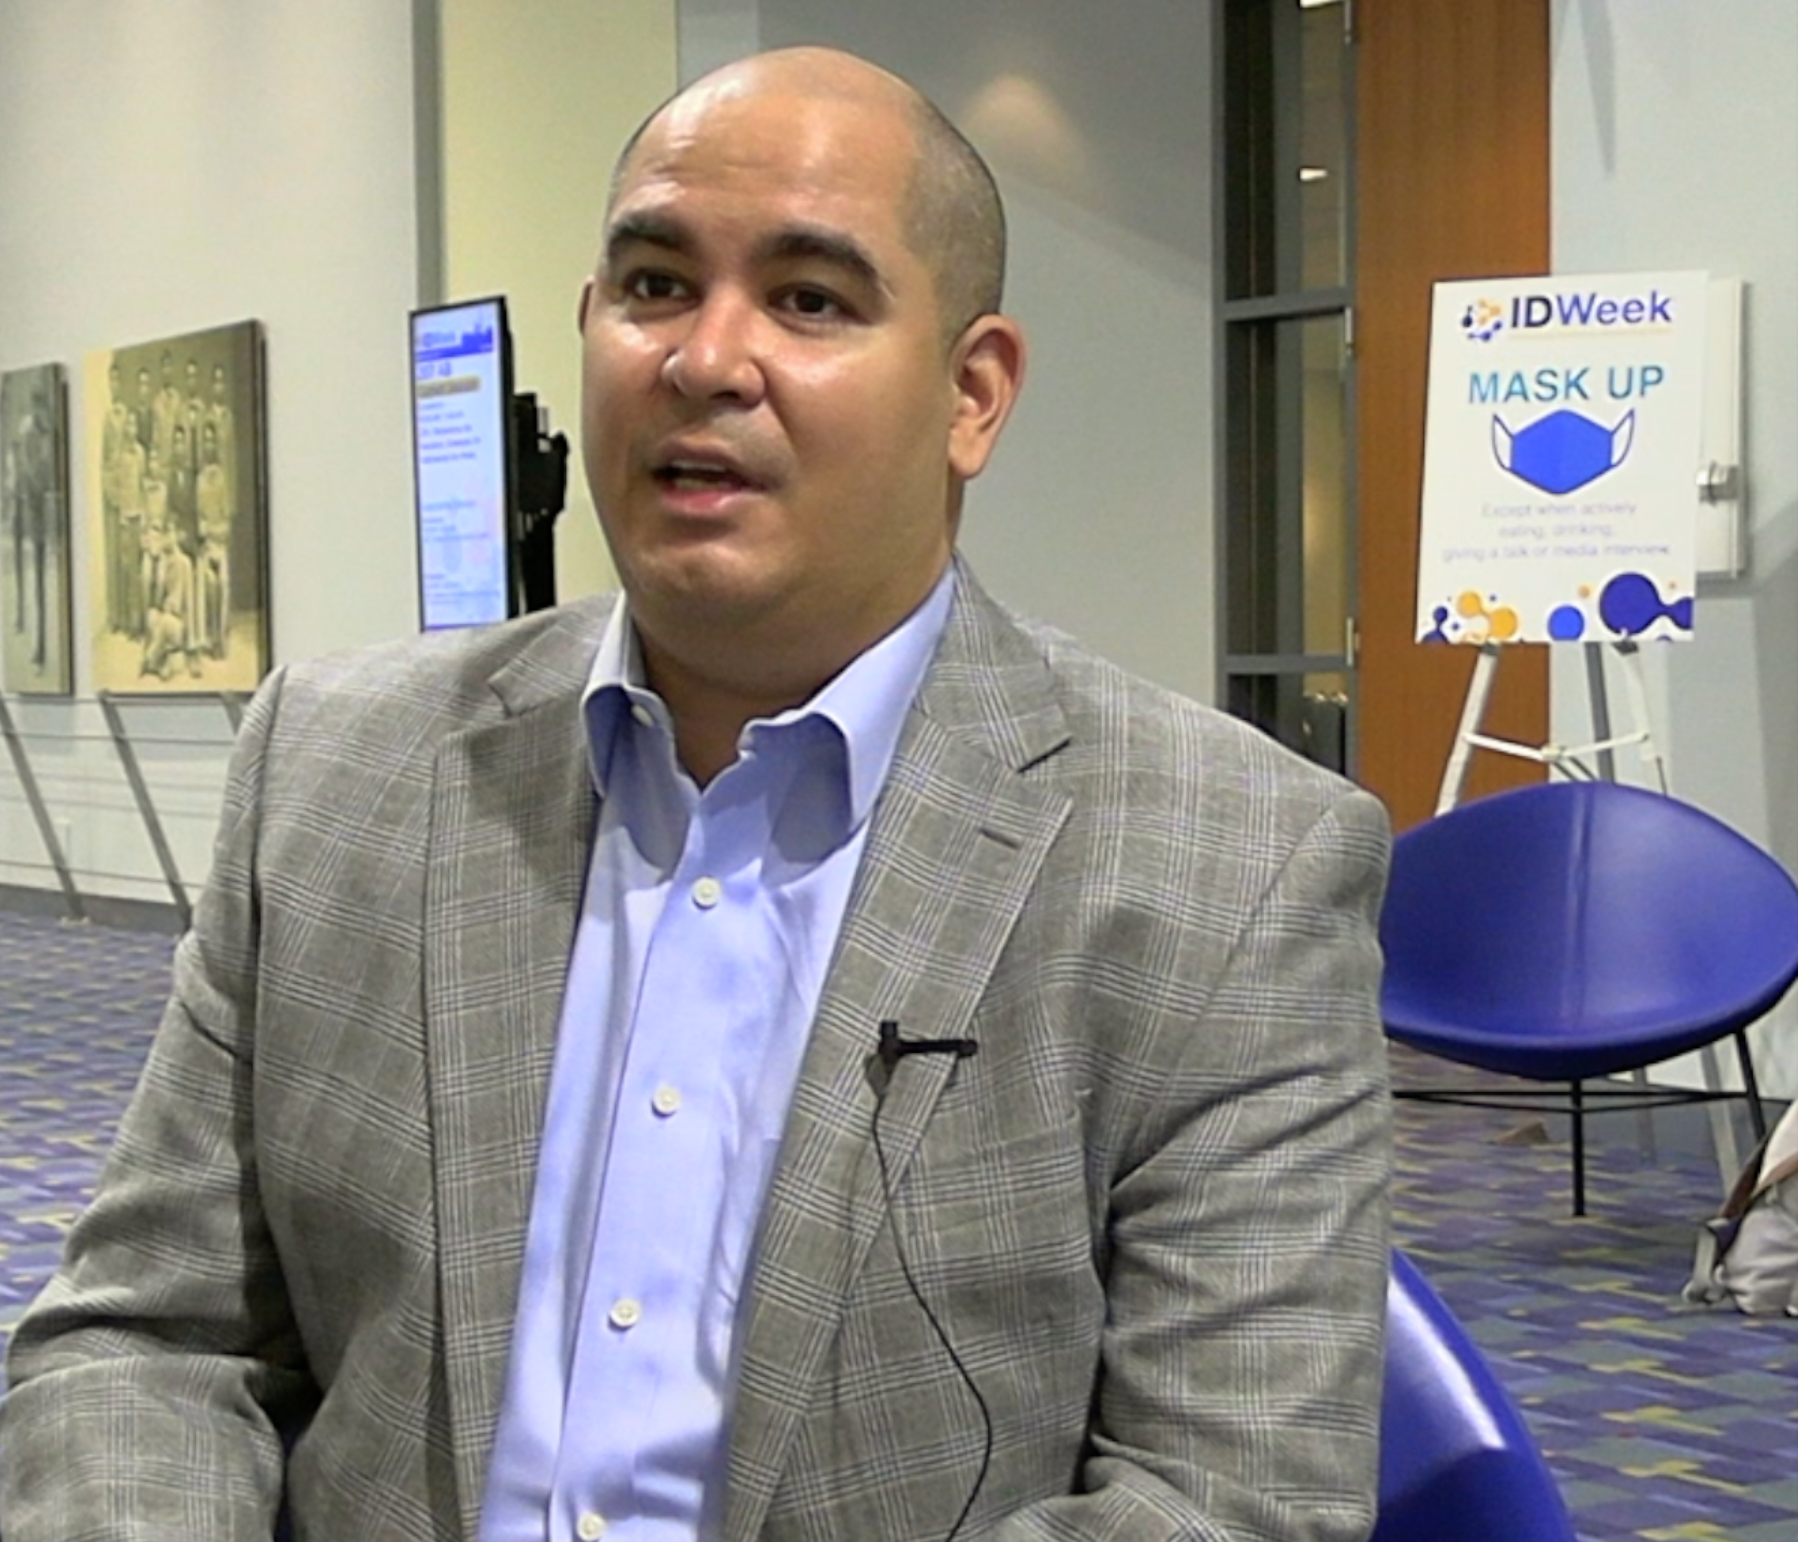 What makes Novavax’s COVID-19 booster different? The adjuvanted vaccine “has kept recognizing variants that arise,” says Novavax executive director Germán Áñez, MD.